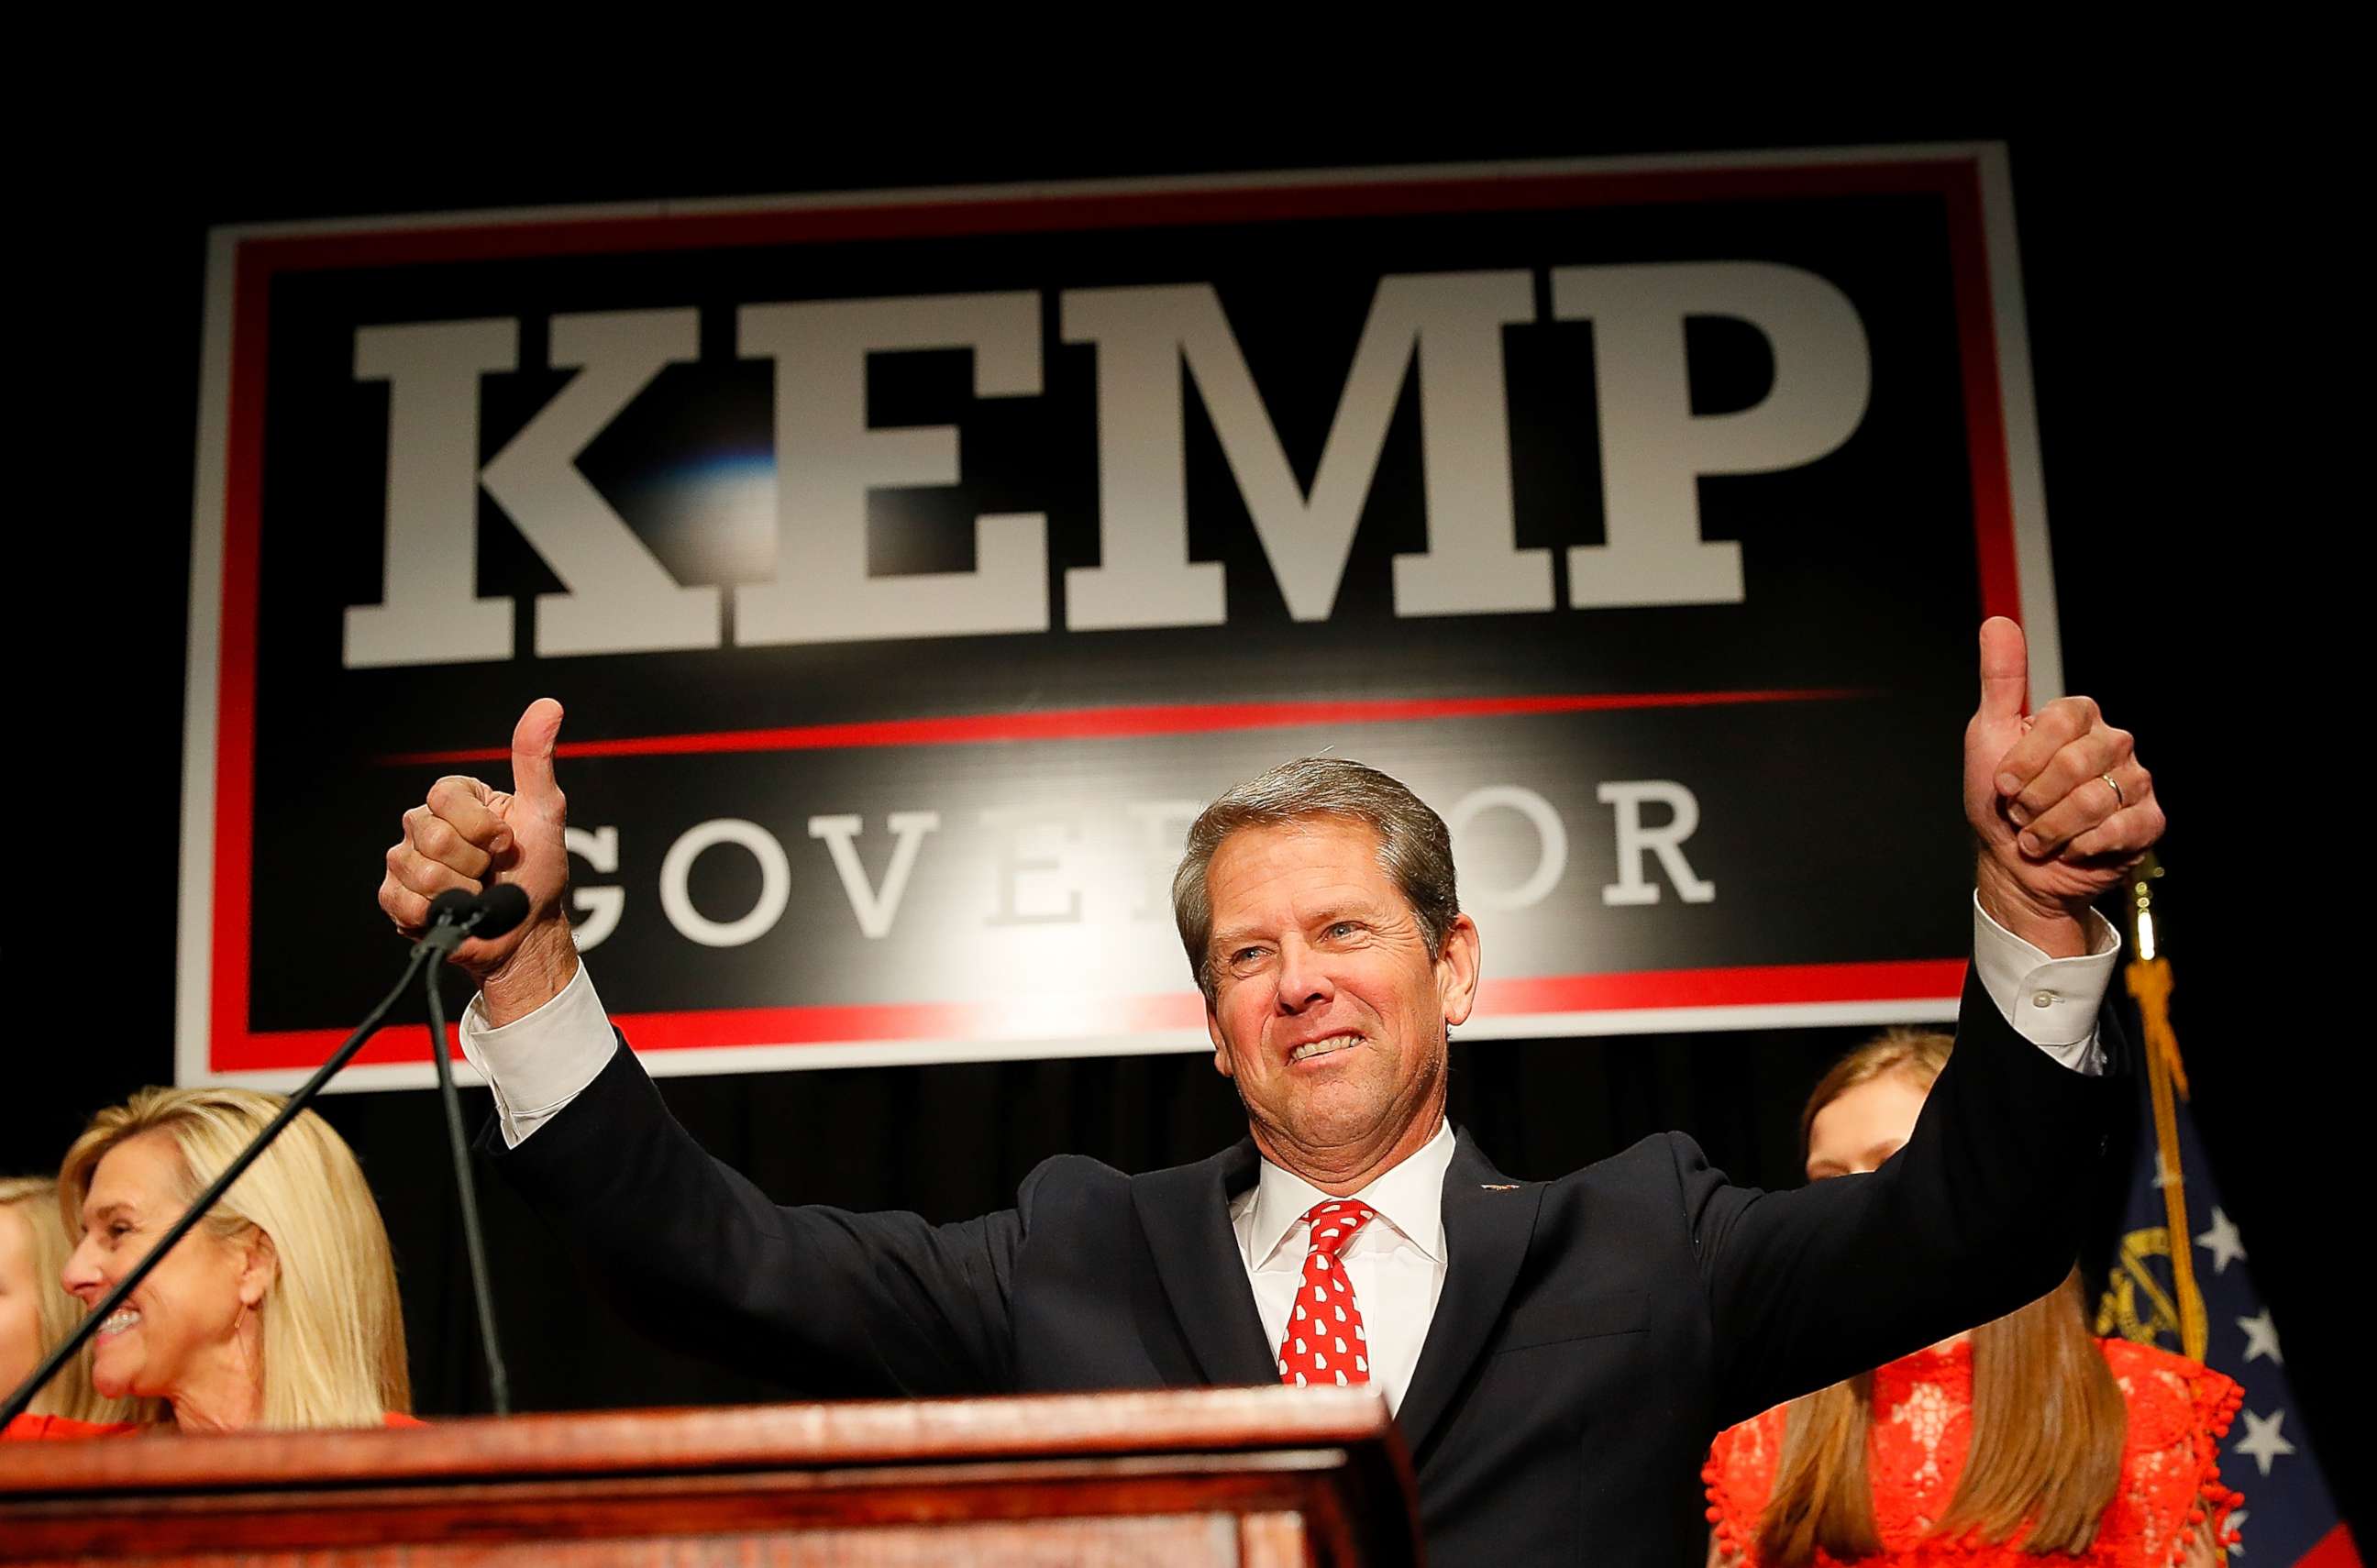 PHOTO: Republican gubernatorial candidate Brian Kemp attends the Election Night event at the Classic Center on Nov. 6, 2018 in Athens, Ga.